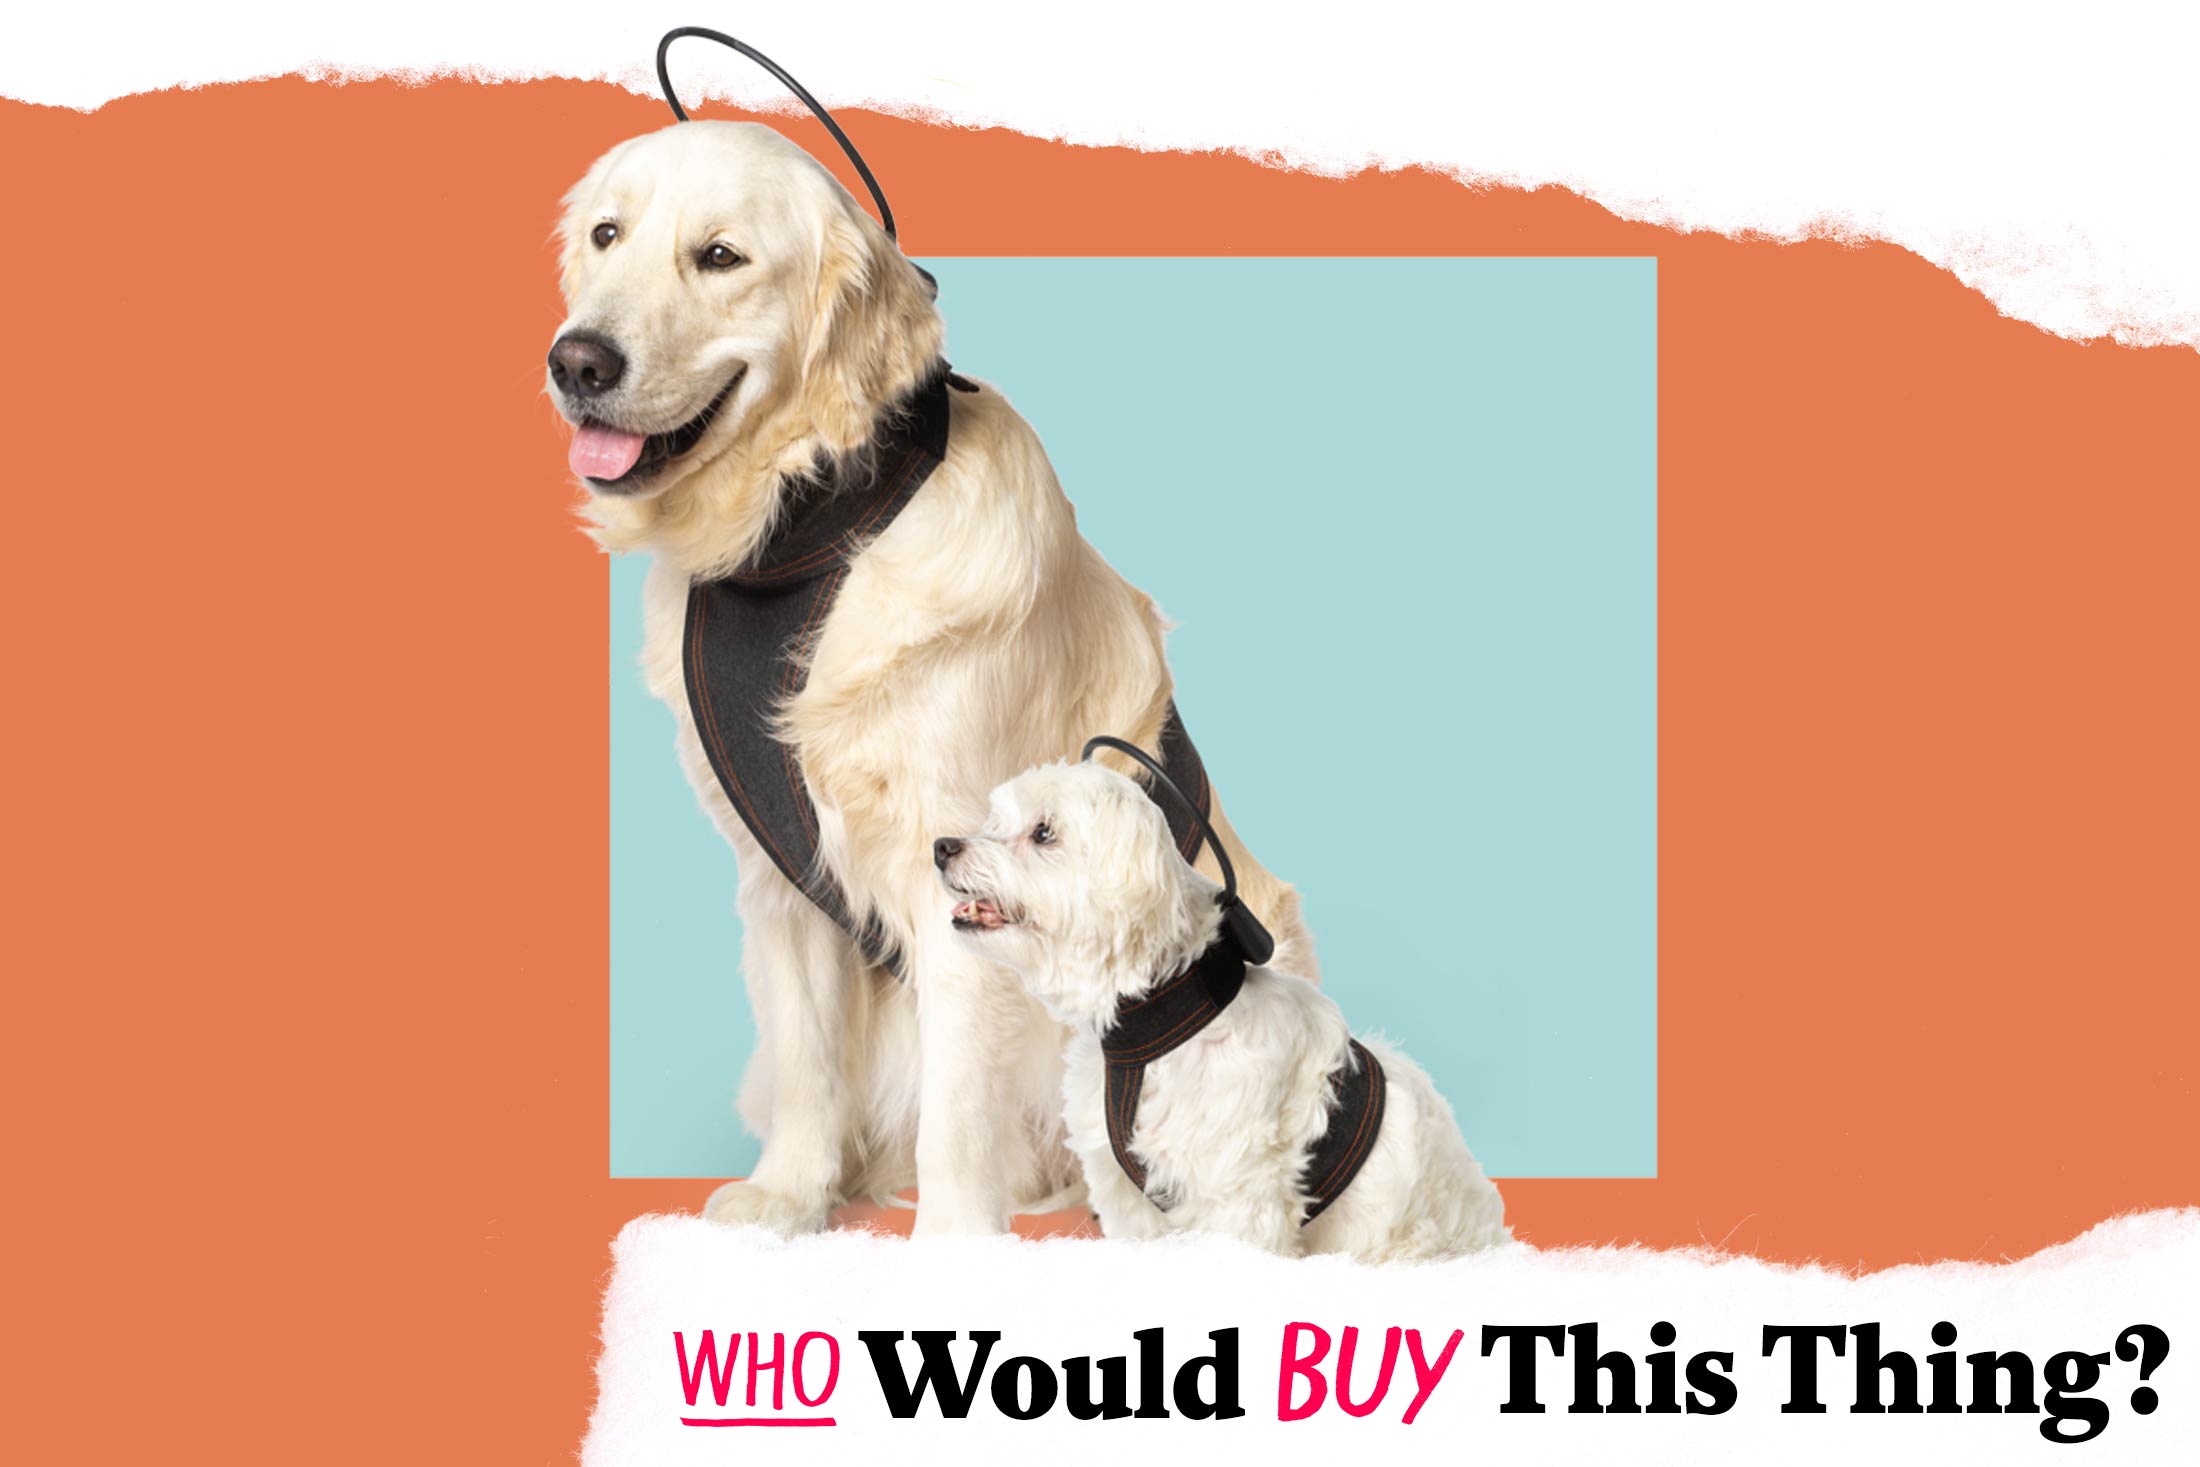 Two dogs, one significantly larger than the other, wearing a harnesslike product